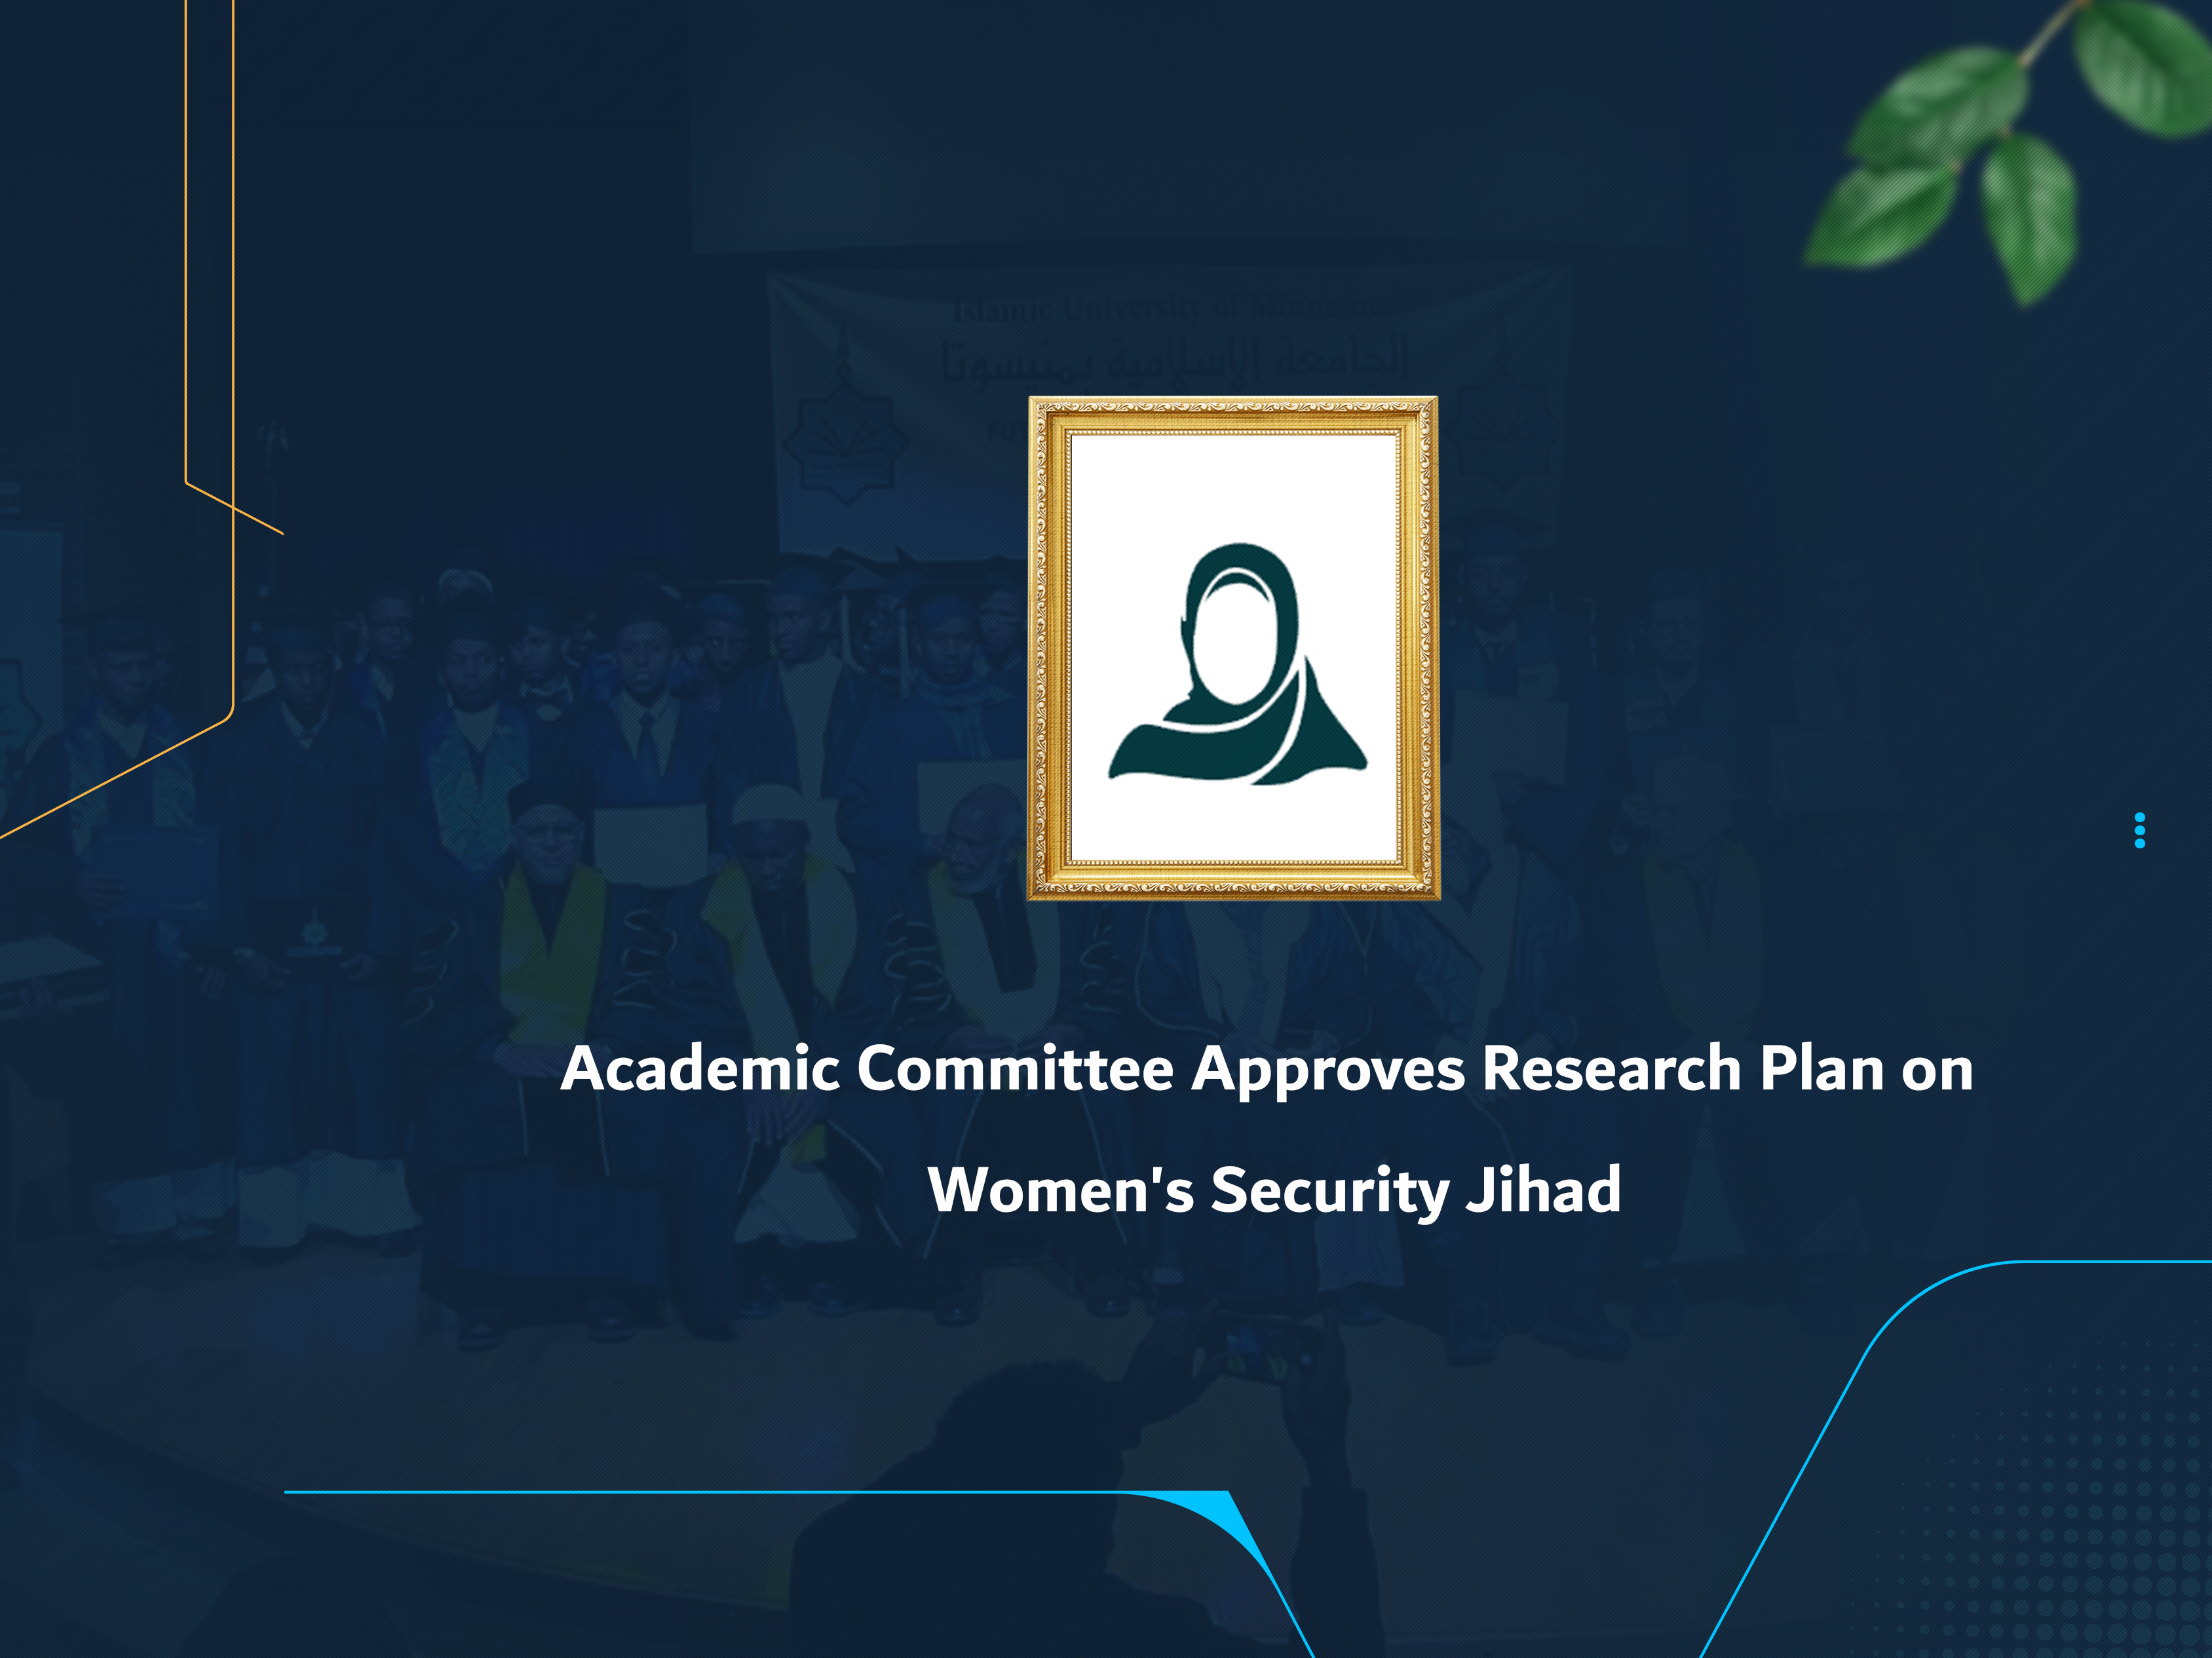 Academic Committee Approves Research Plan on Women's Security Jihad